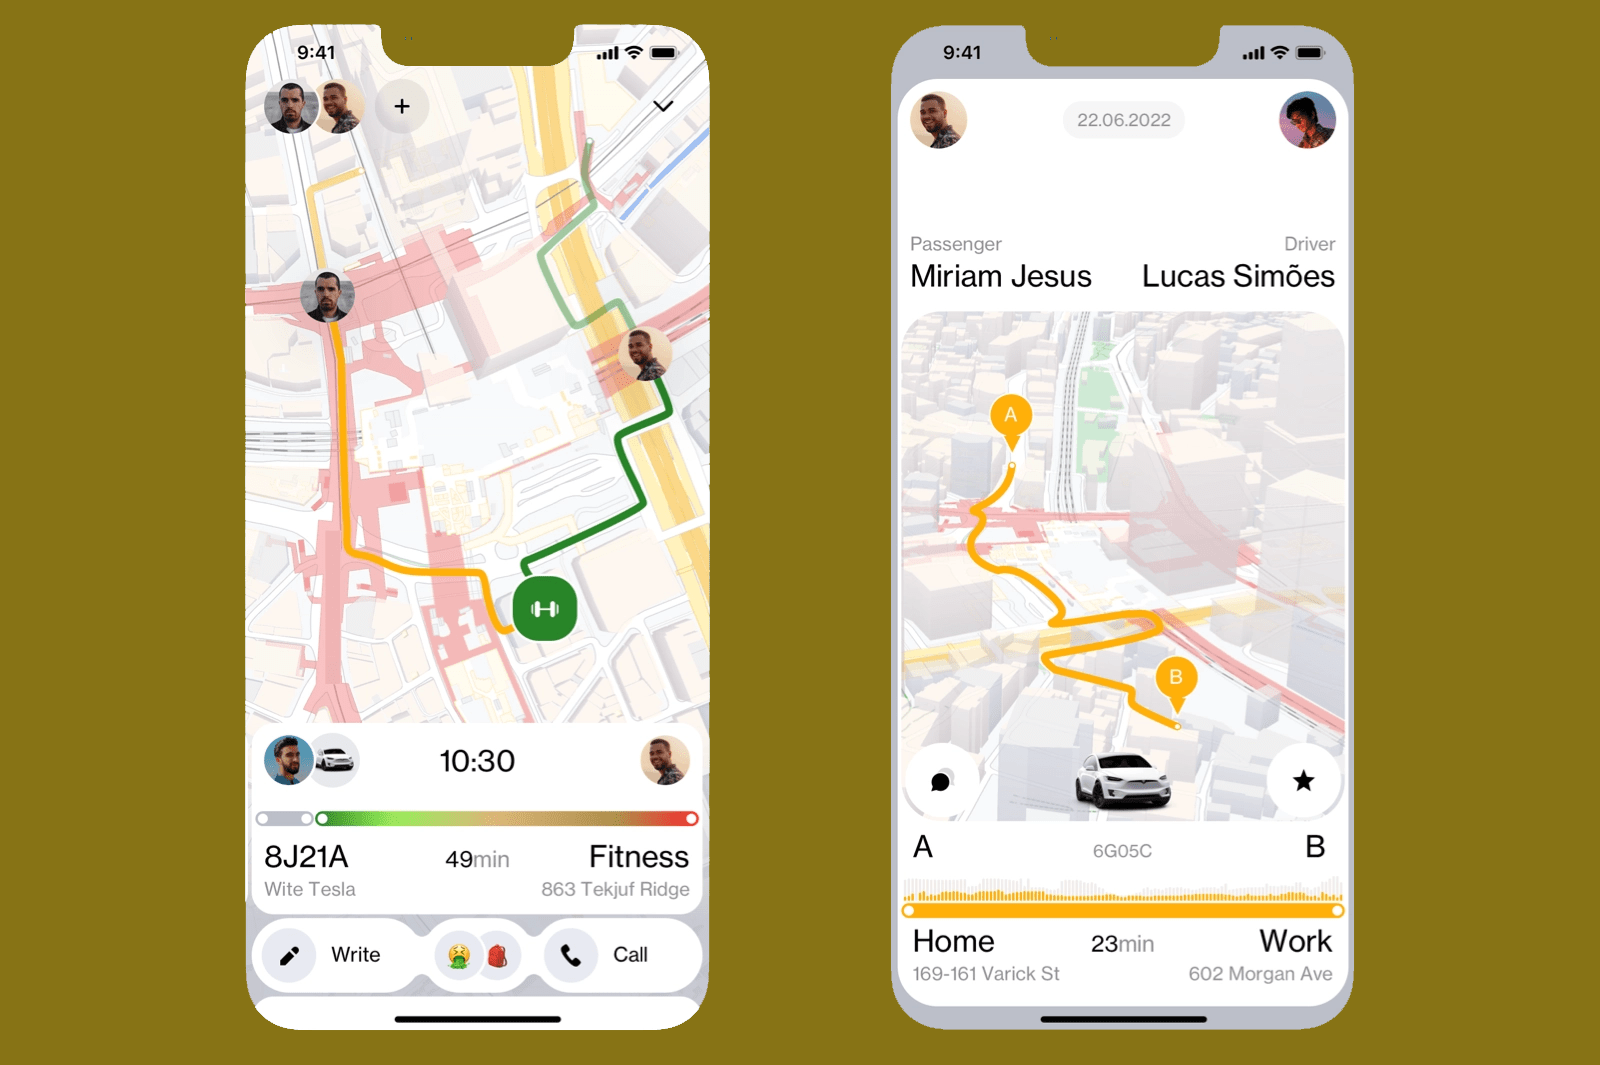 taxi-booking-app